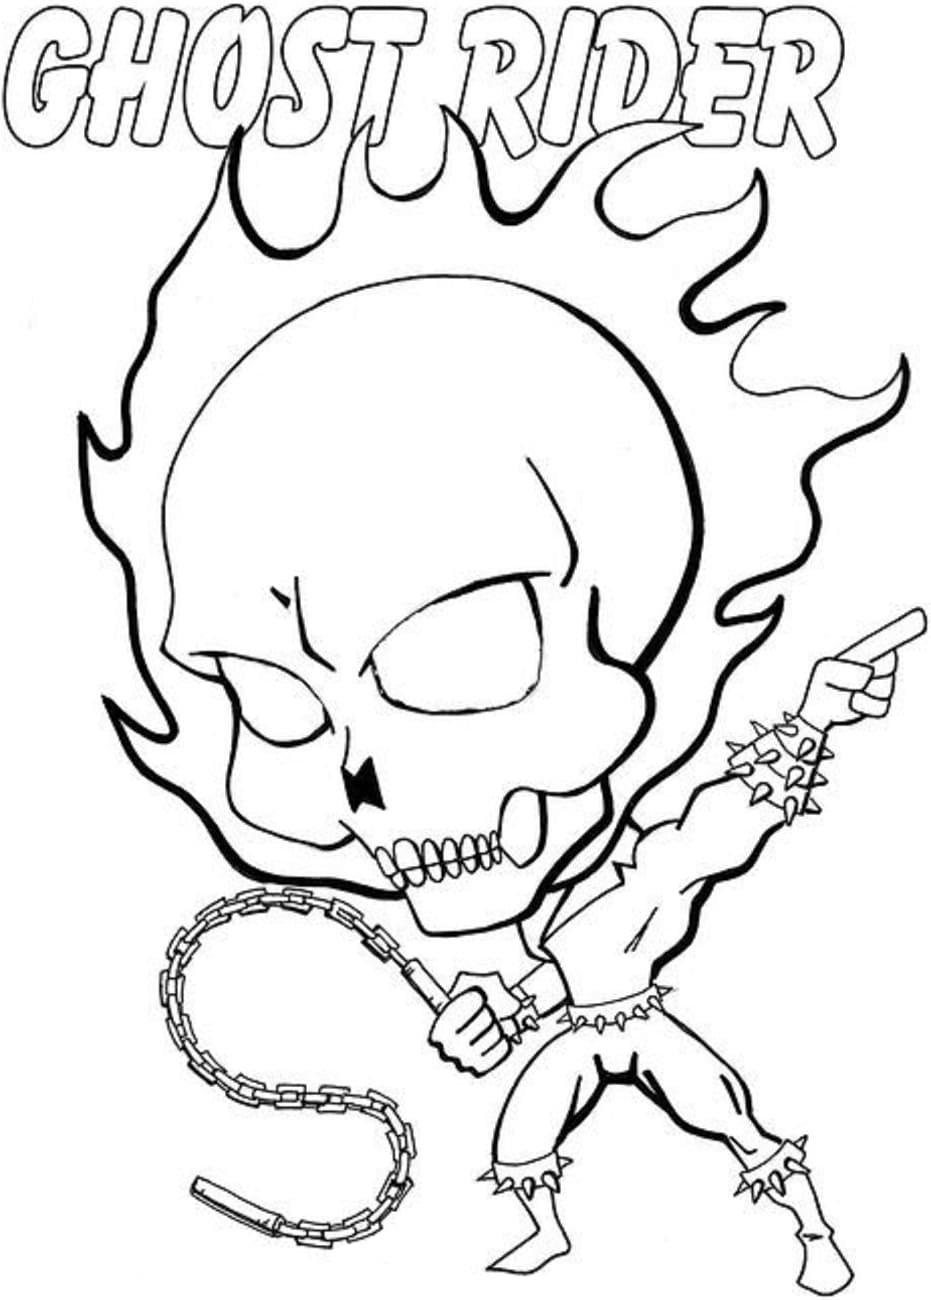 How To Draw A Ghost Rider Skull Step By Step